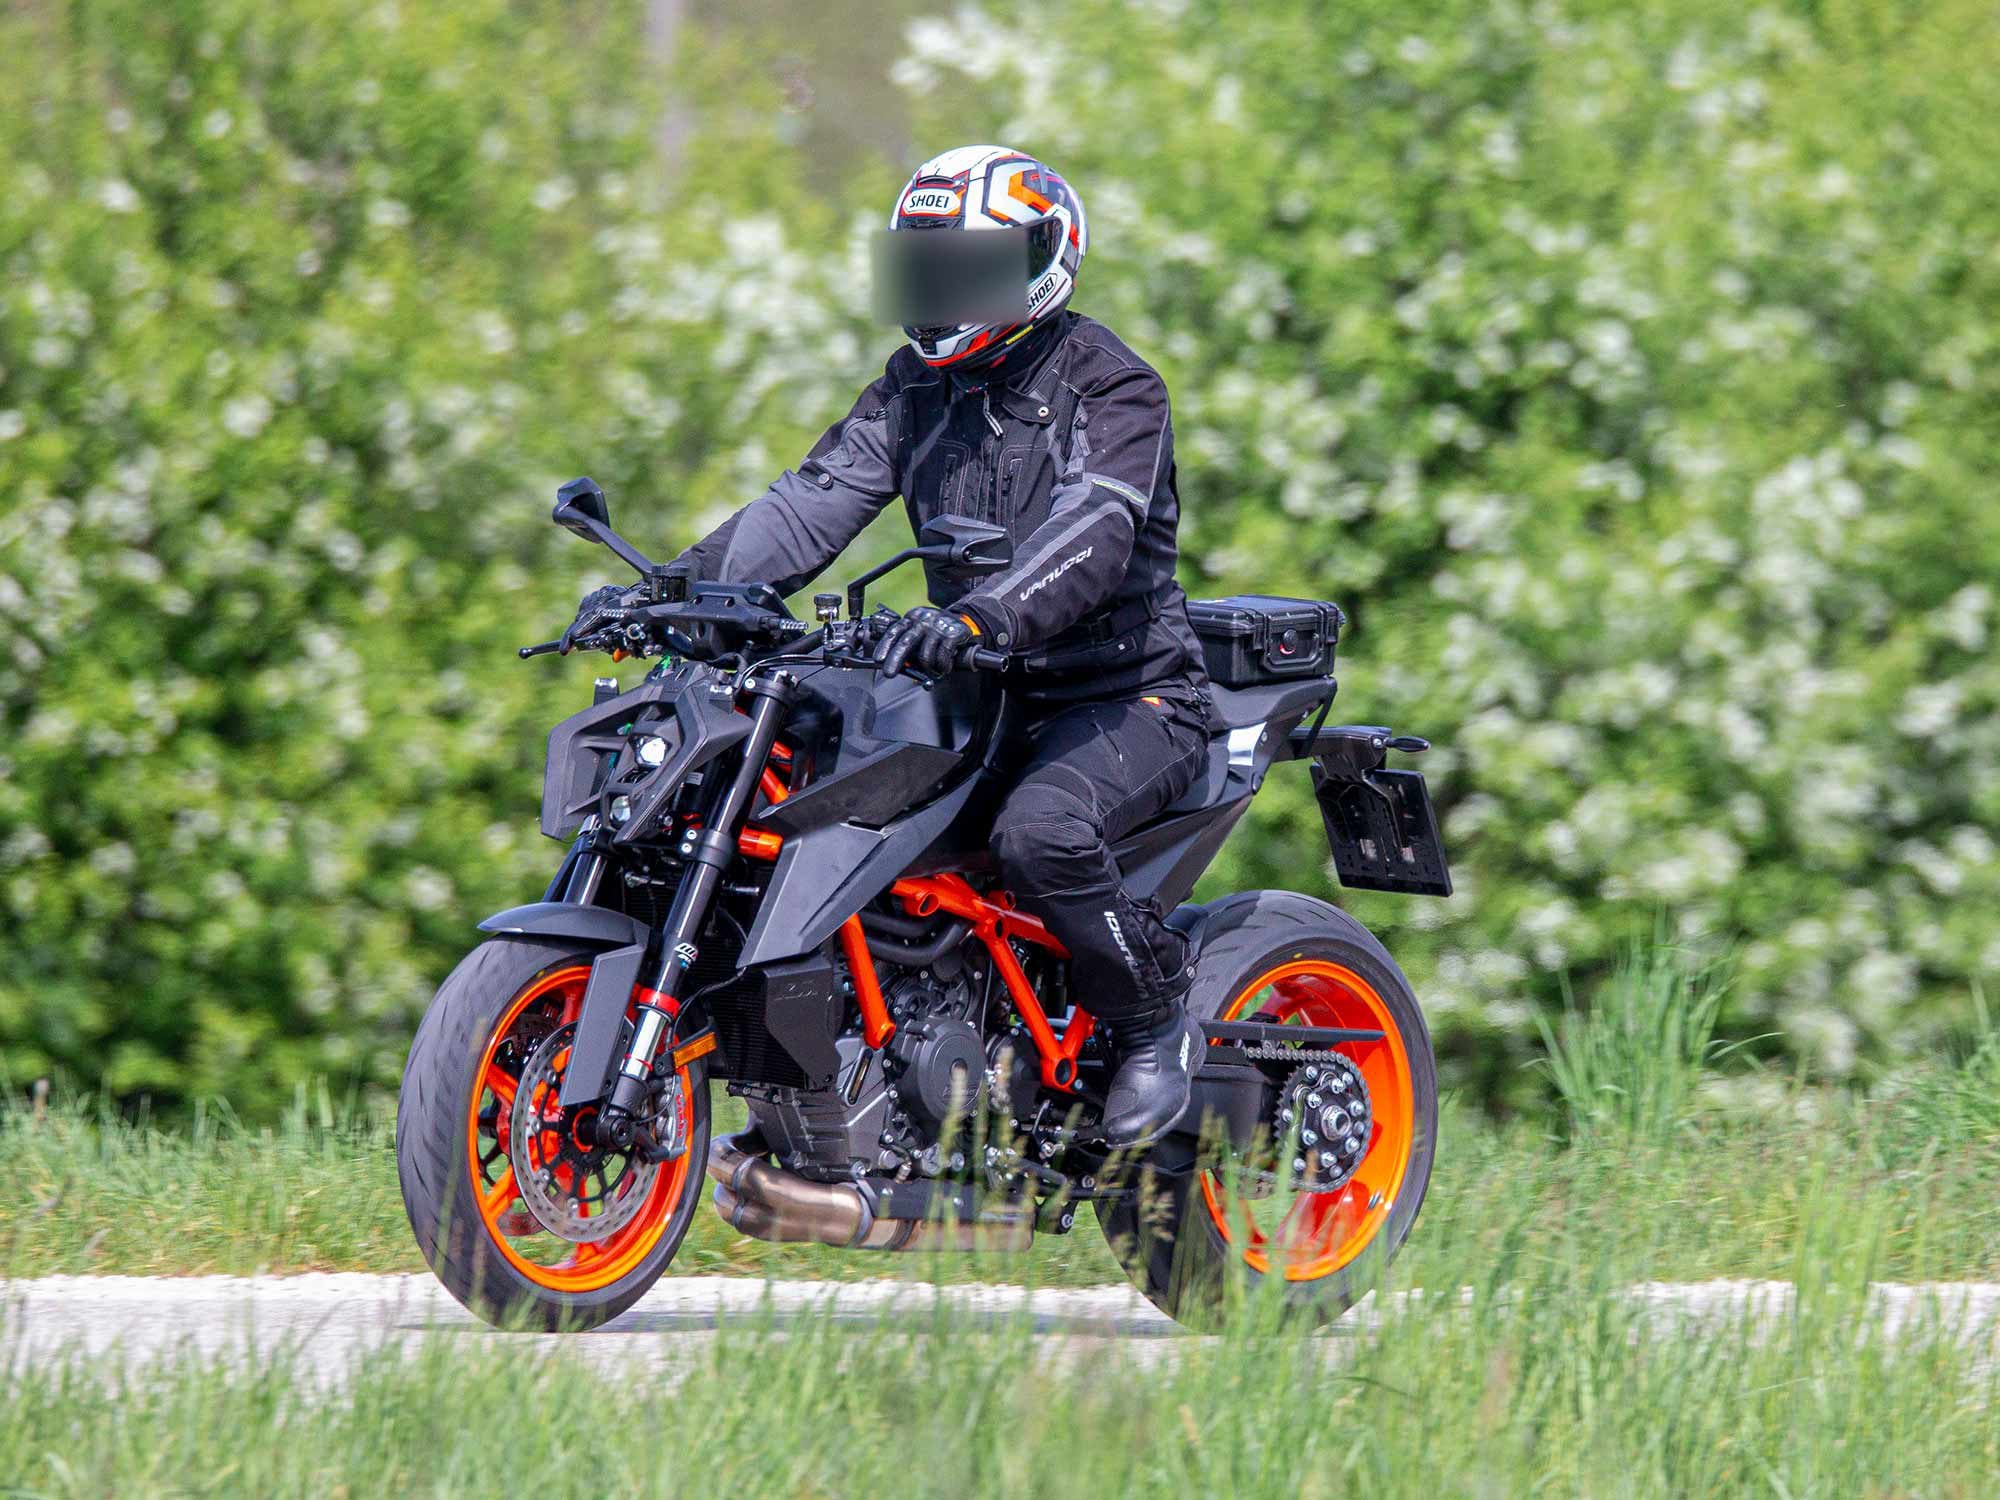 We believe this KTM 1290 Super Duke R is the soon-to-be-announced 2023 model with an updated headlight cowl and styling.